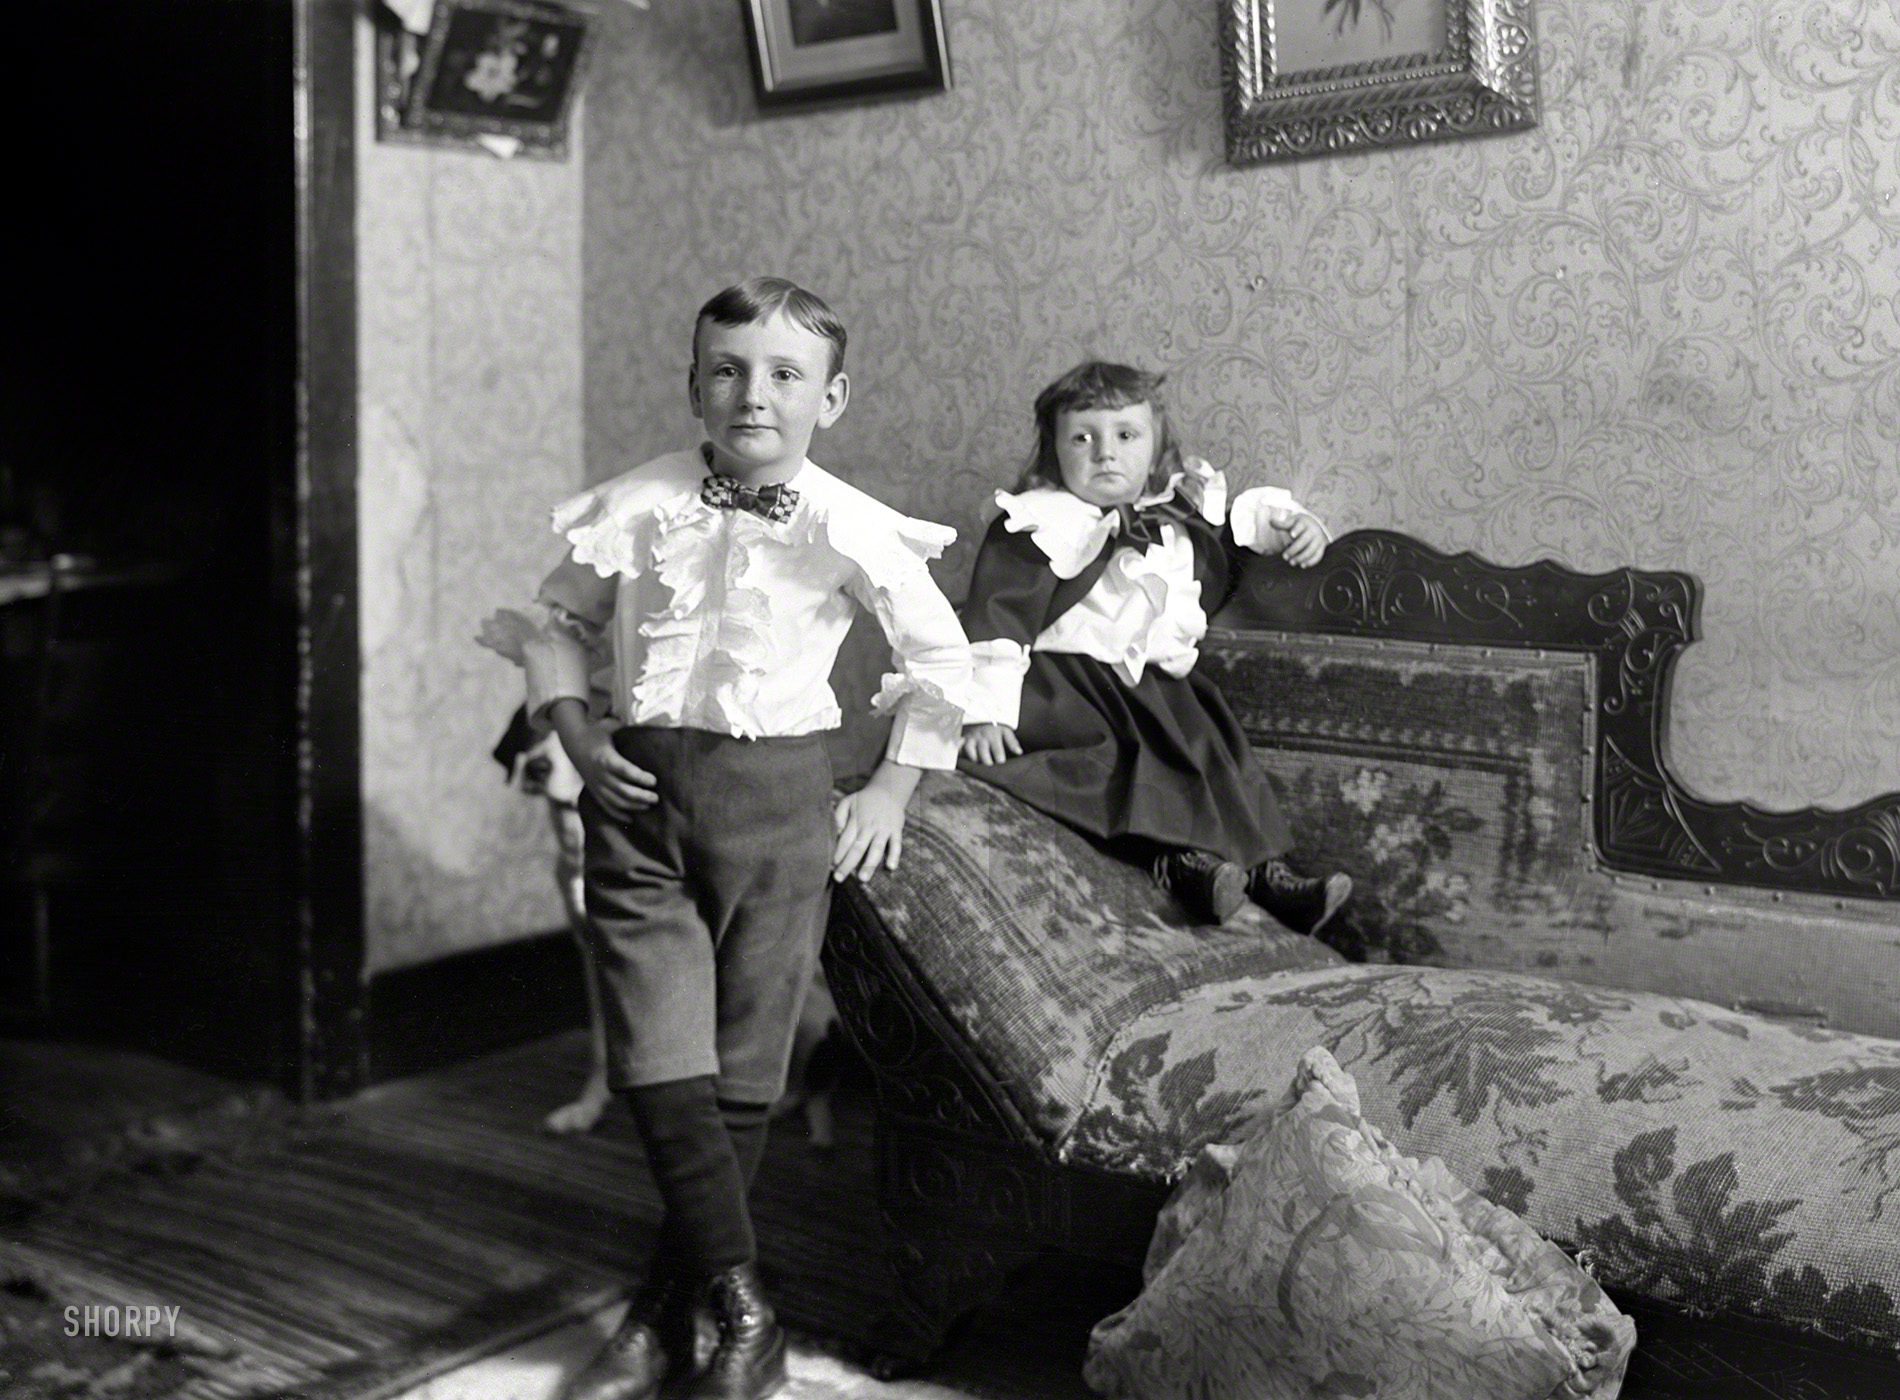 Somewhere in New England circa 1900. "Children at home." Where some get the comfy couch, and others a dark corner. 5x8 inch glass negative. View full size.